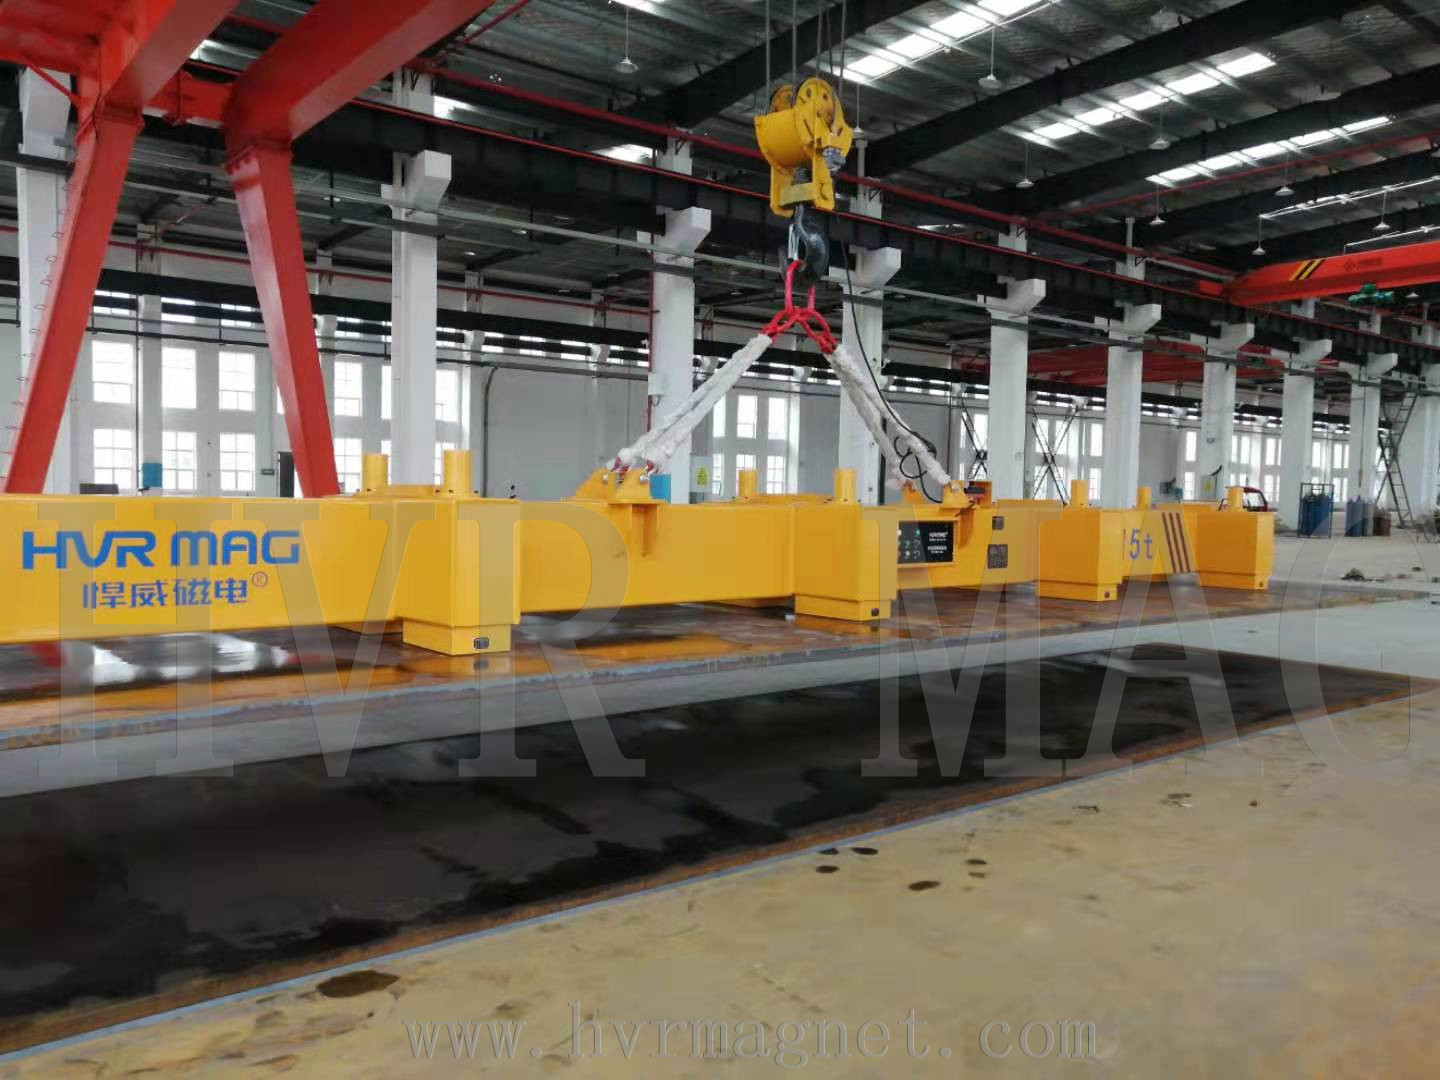 Magnetic lifting of thick steel plate with hoisting crane - HVR MAG